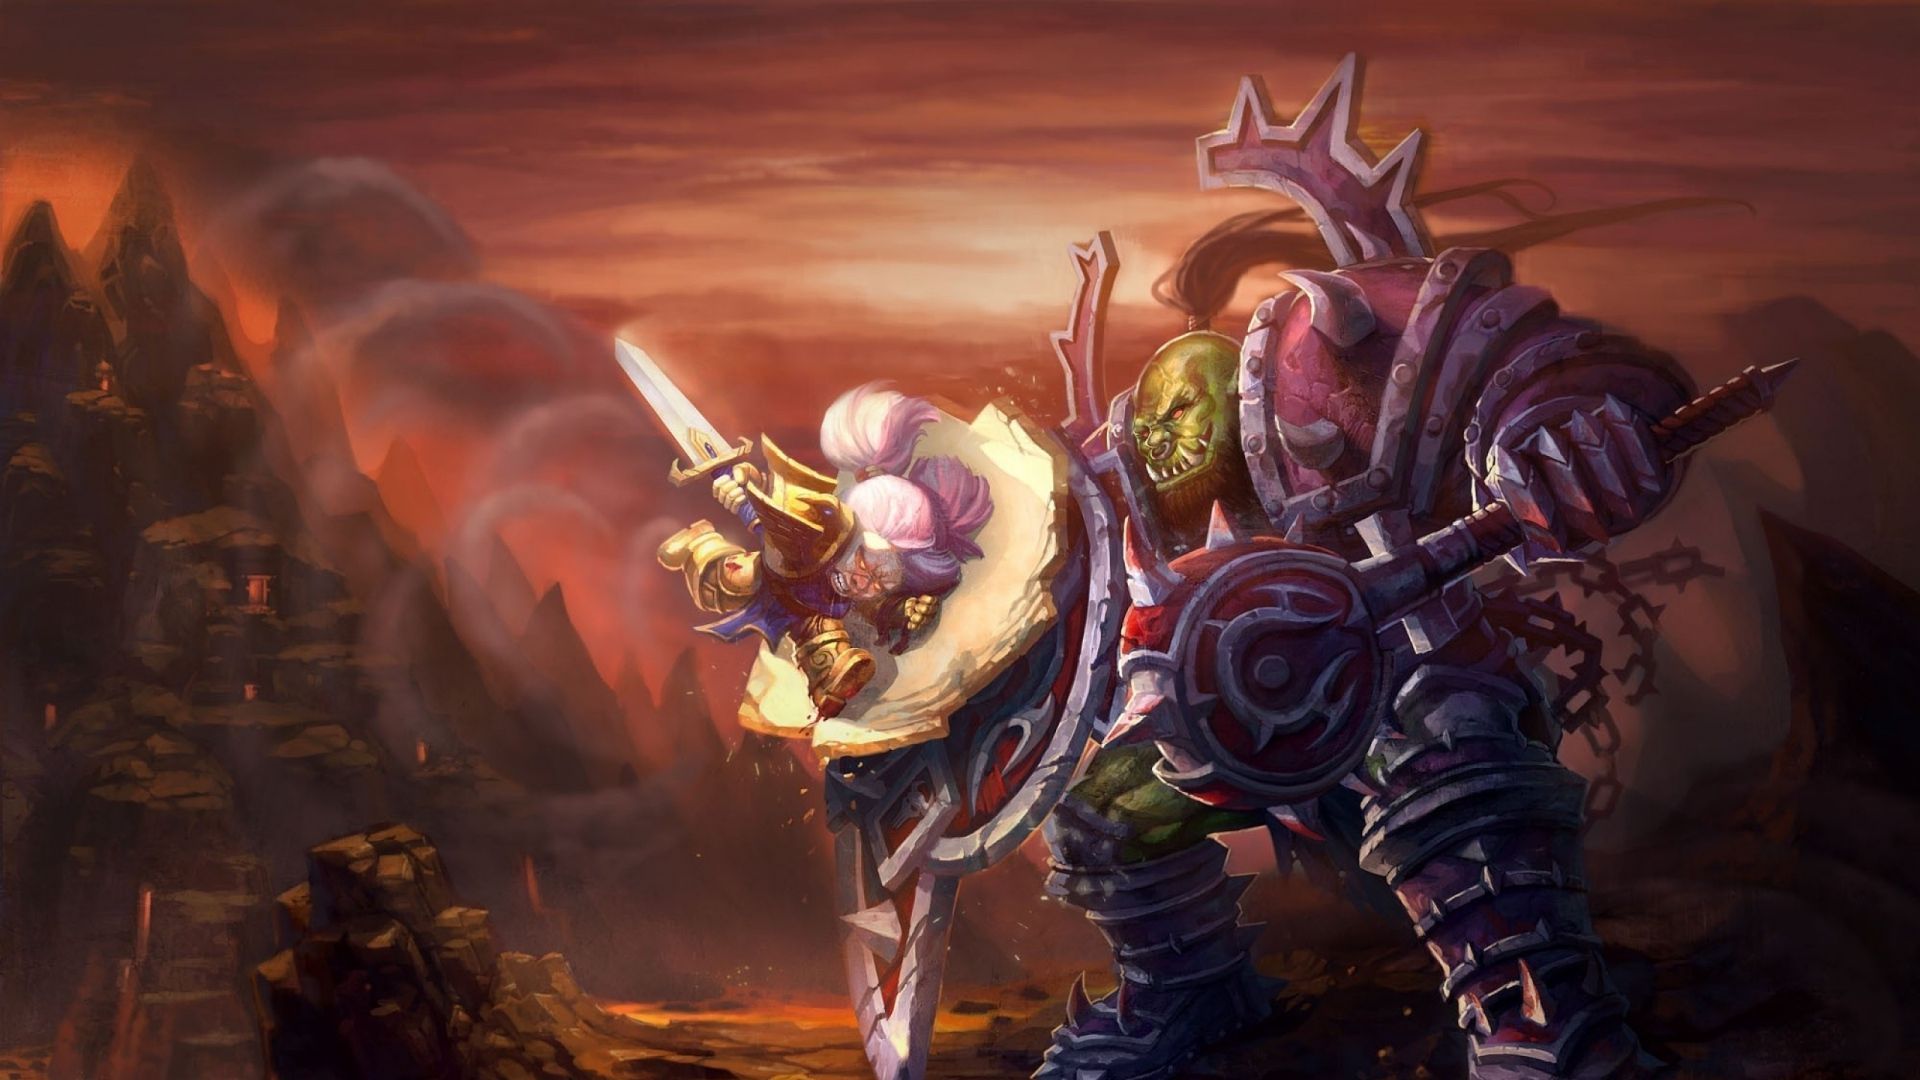 Download Wallpaper 1920x1080 World of warcraft, Wow, Orc, Warrior